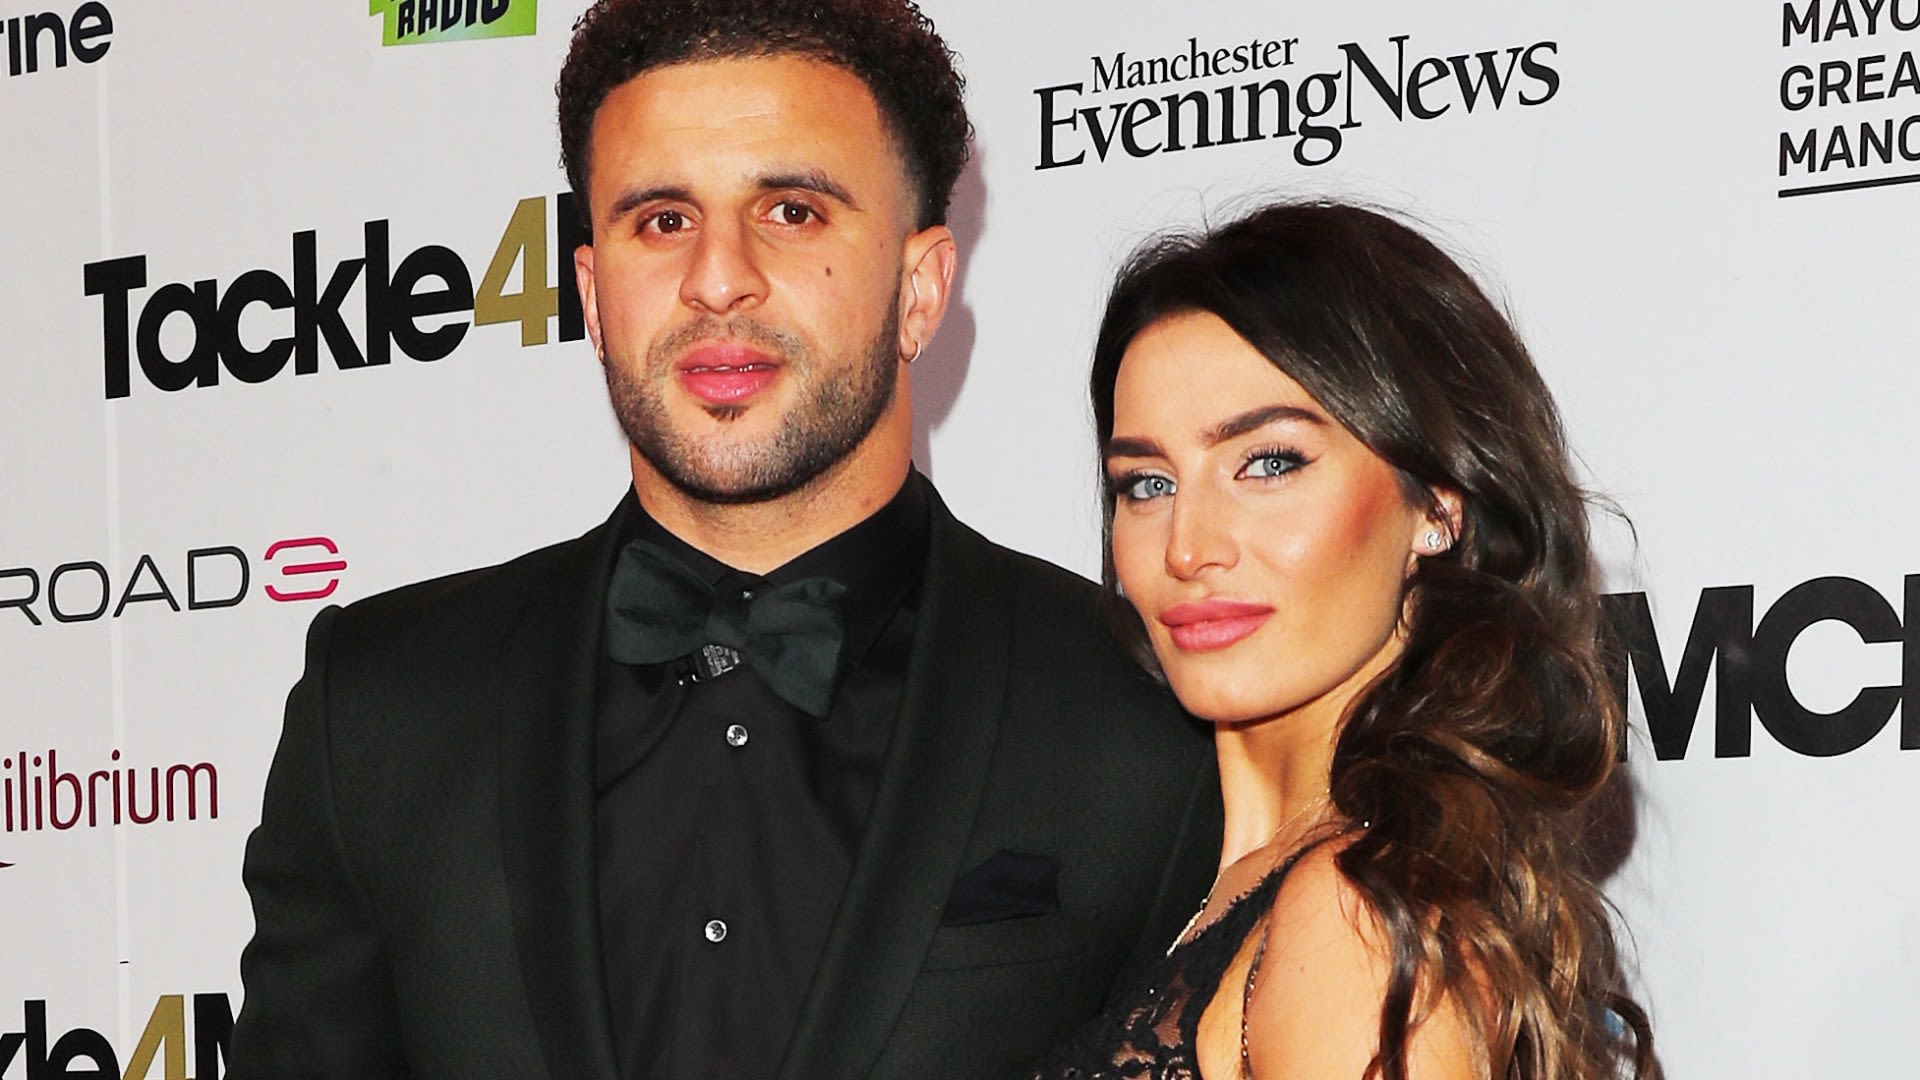 Kyle Walker eyes up mega-money move from Man City in wake of turbulent love life